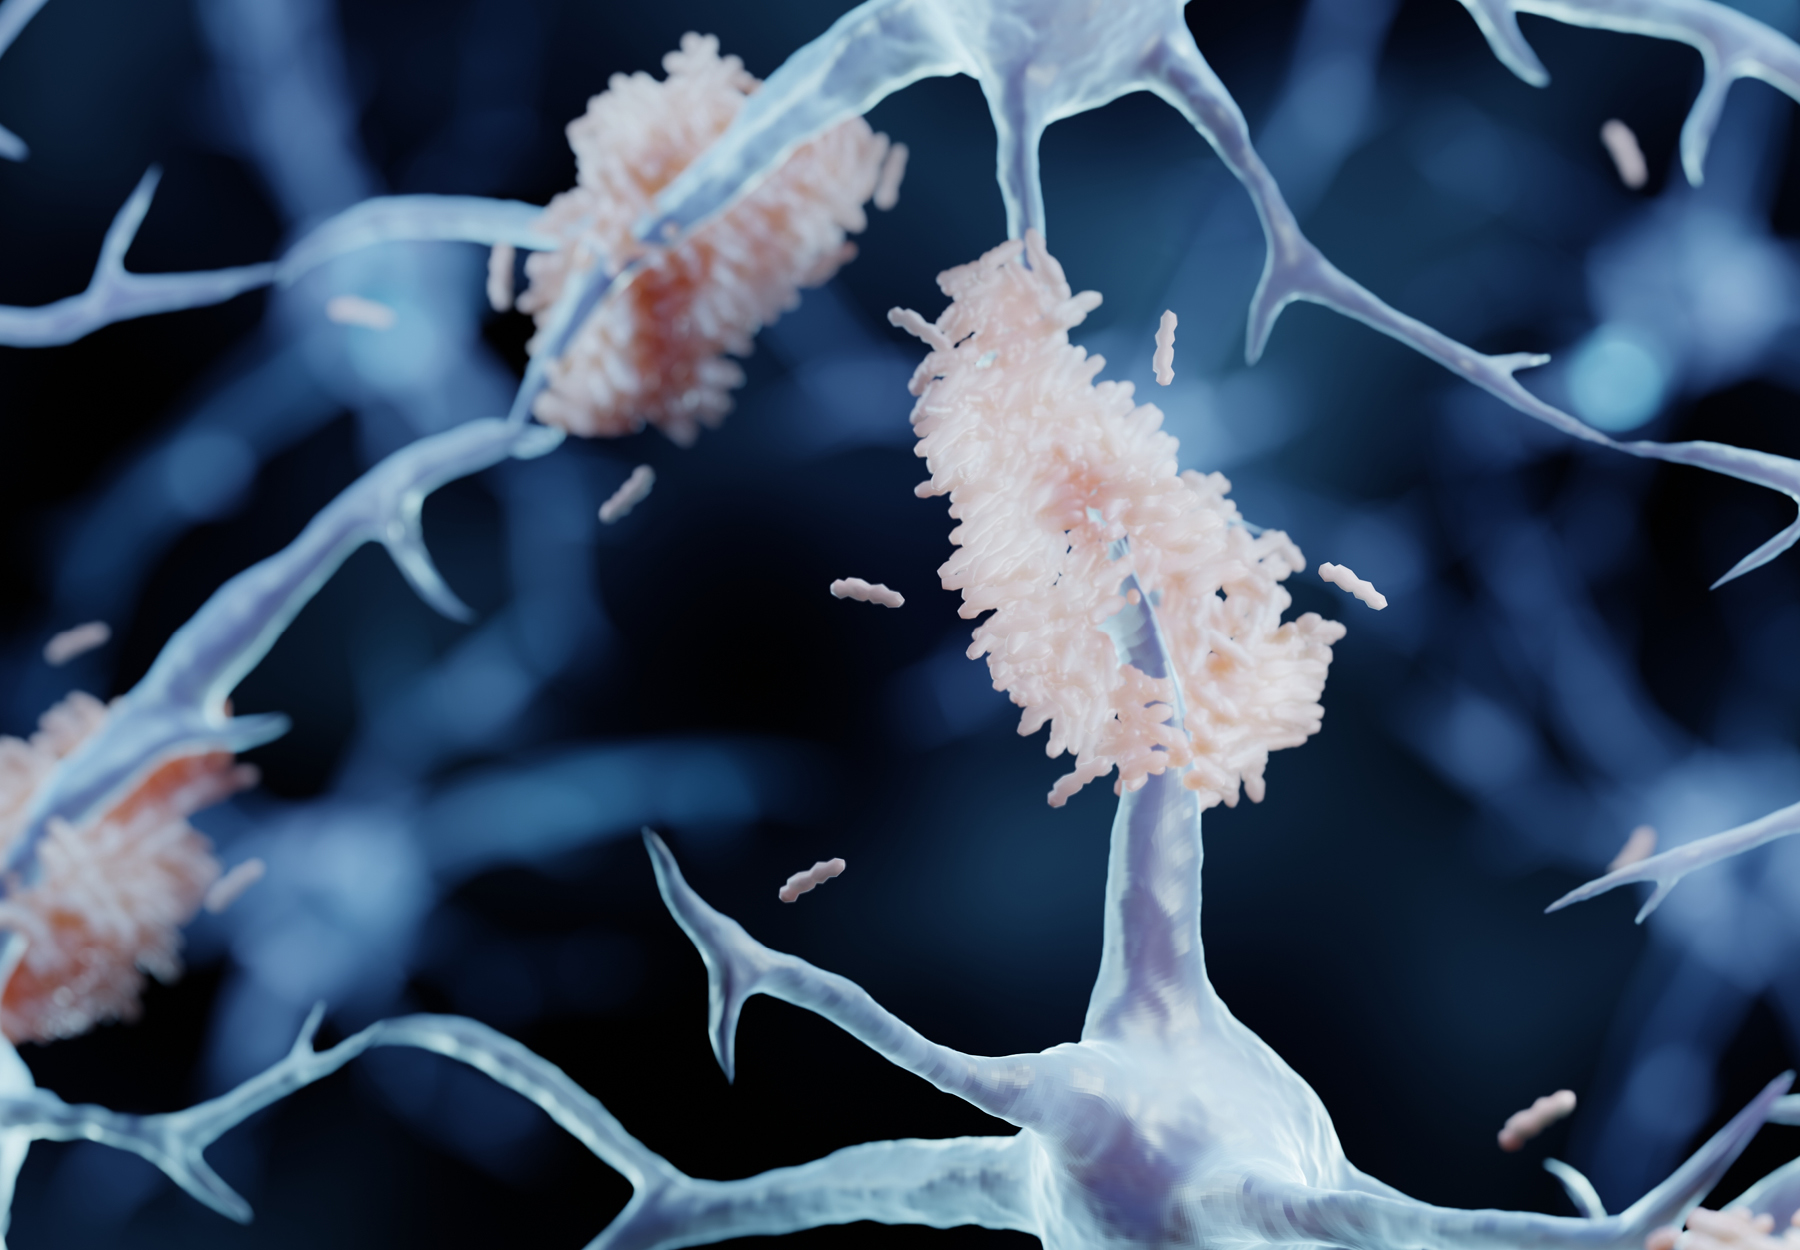 Amyloid plaques in alzheimers disease istock image